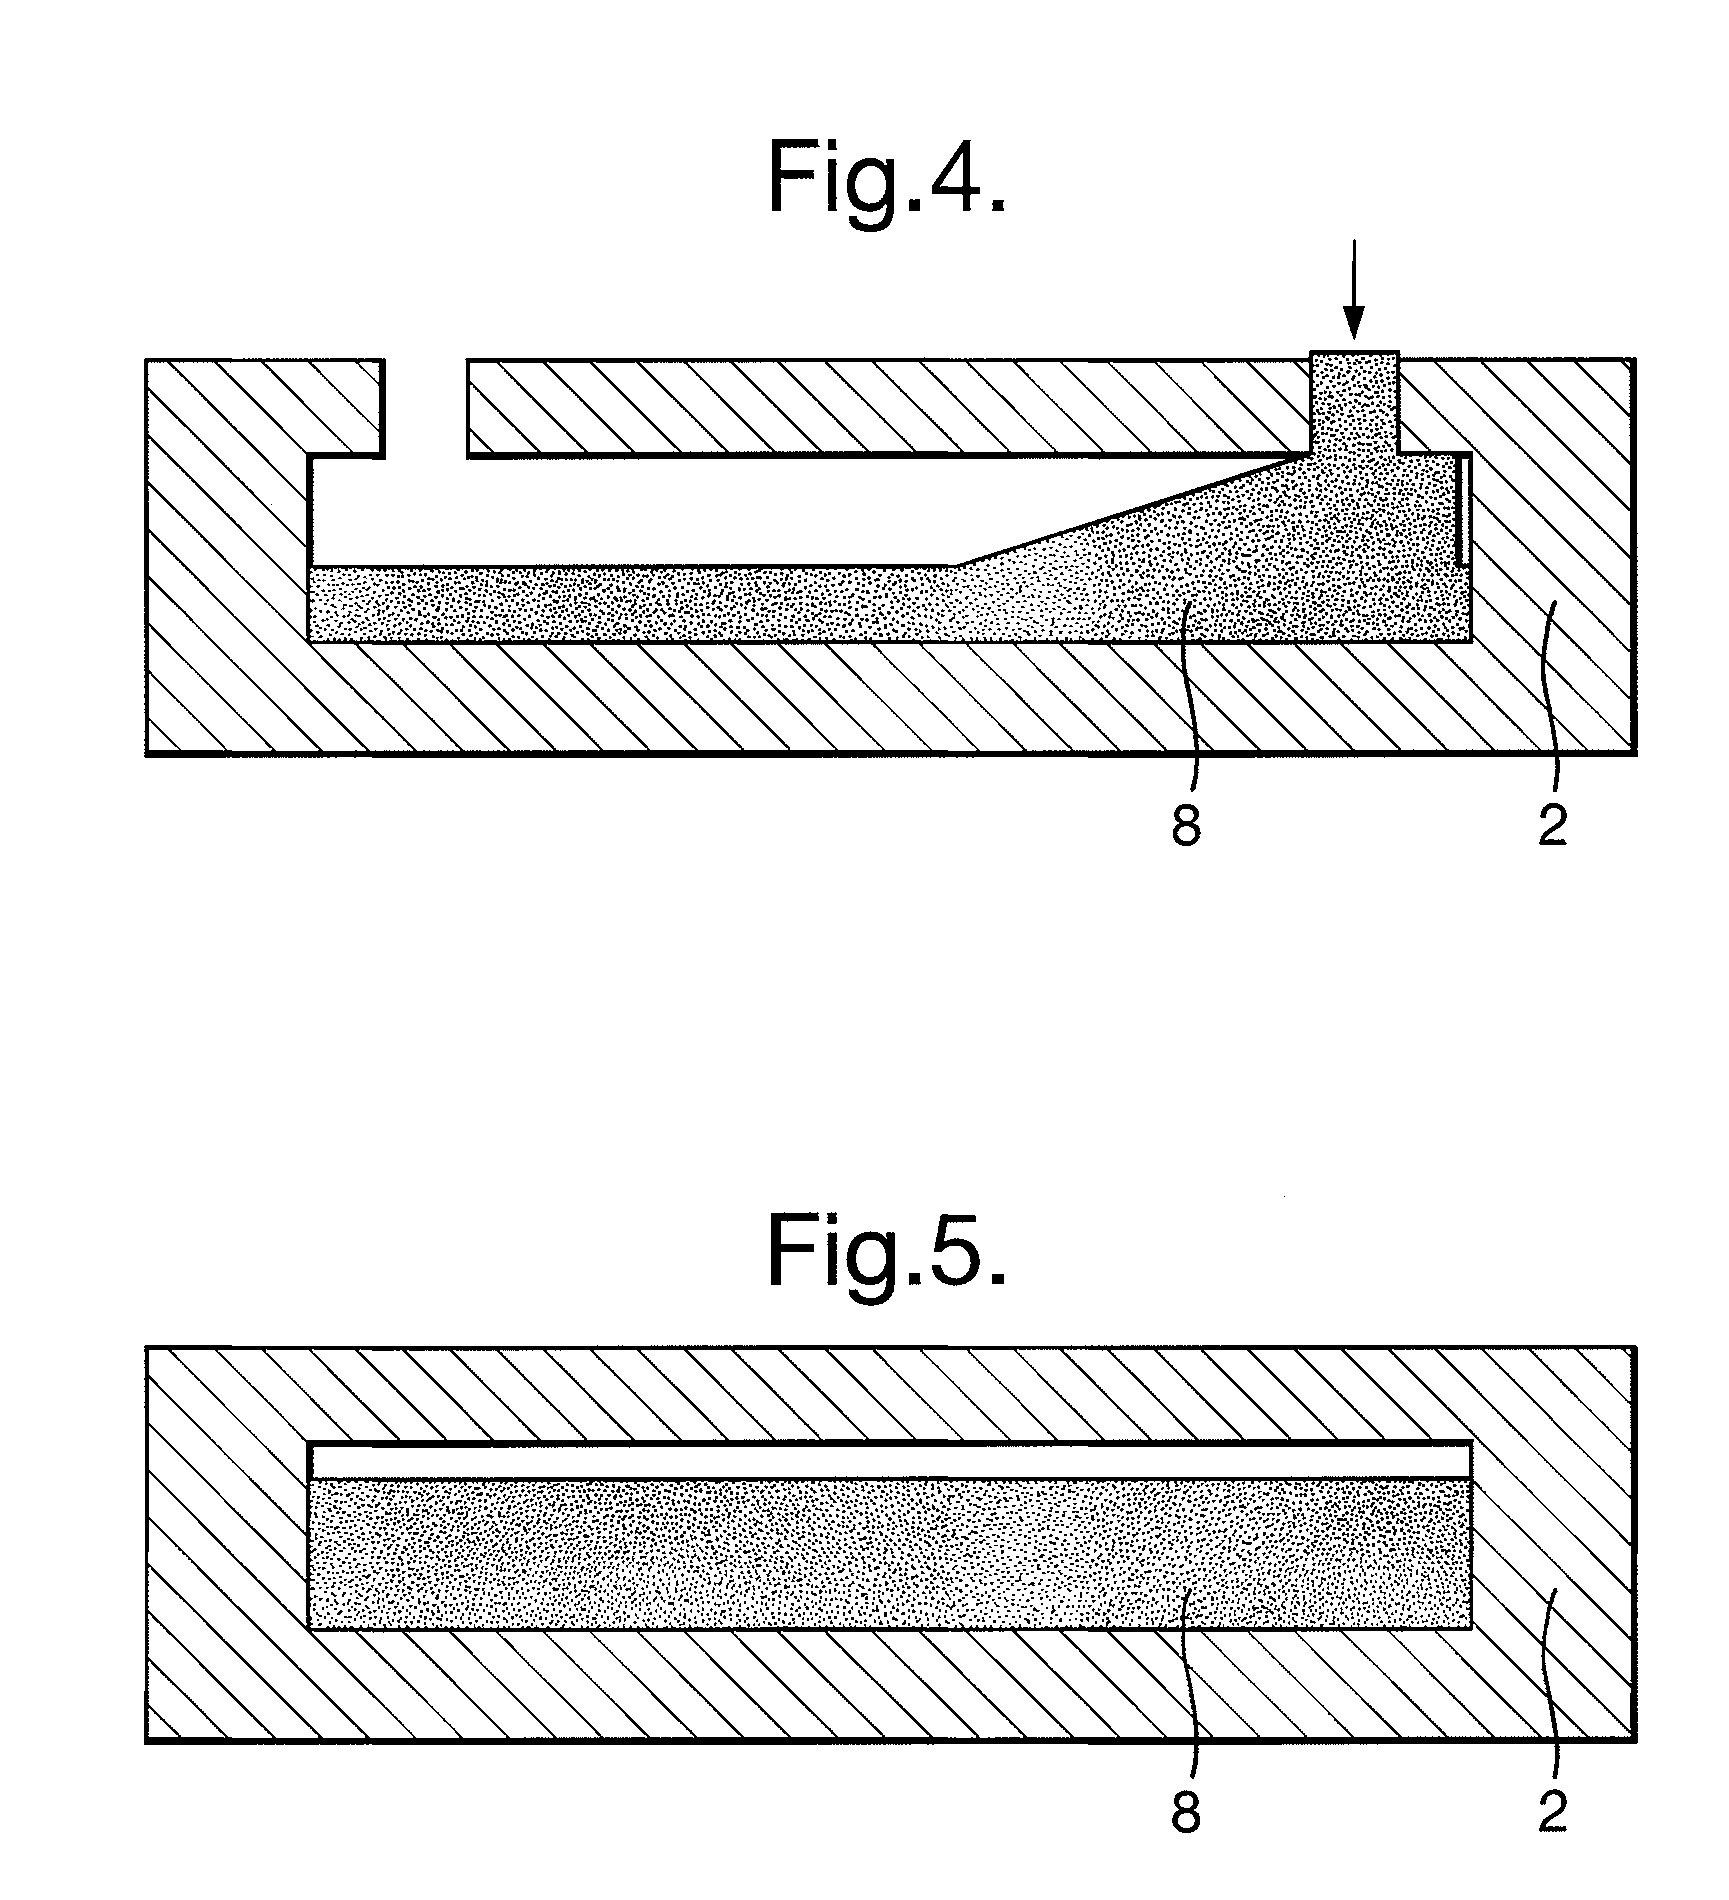 Article and method of manufacture thereof